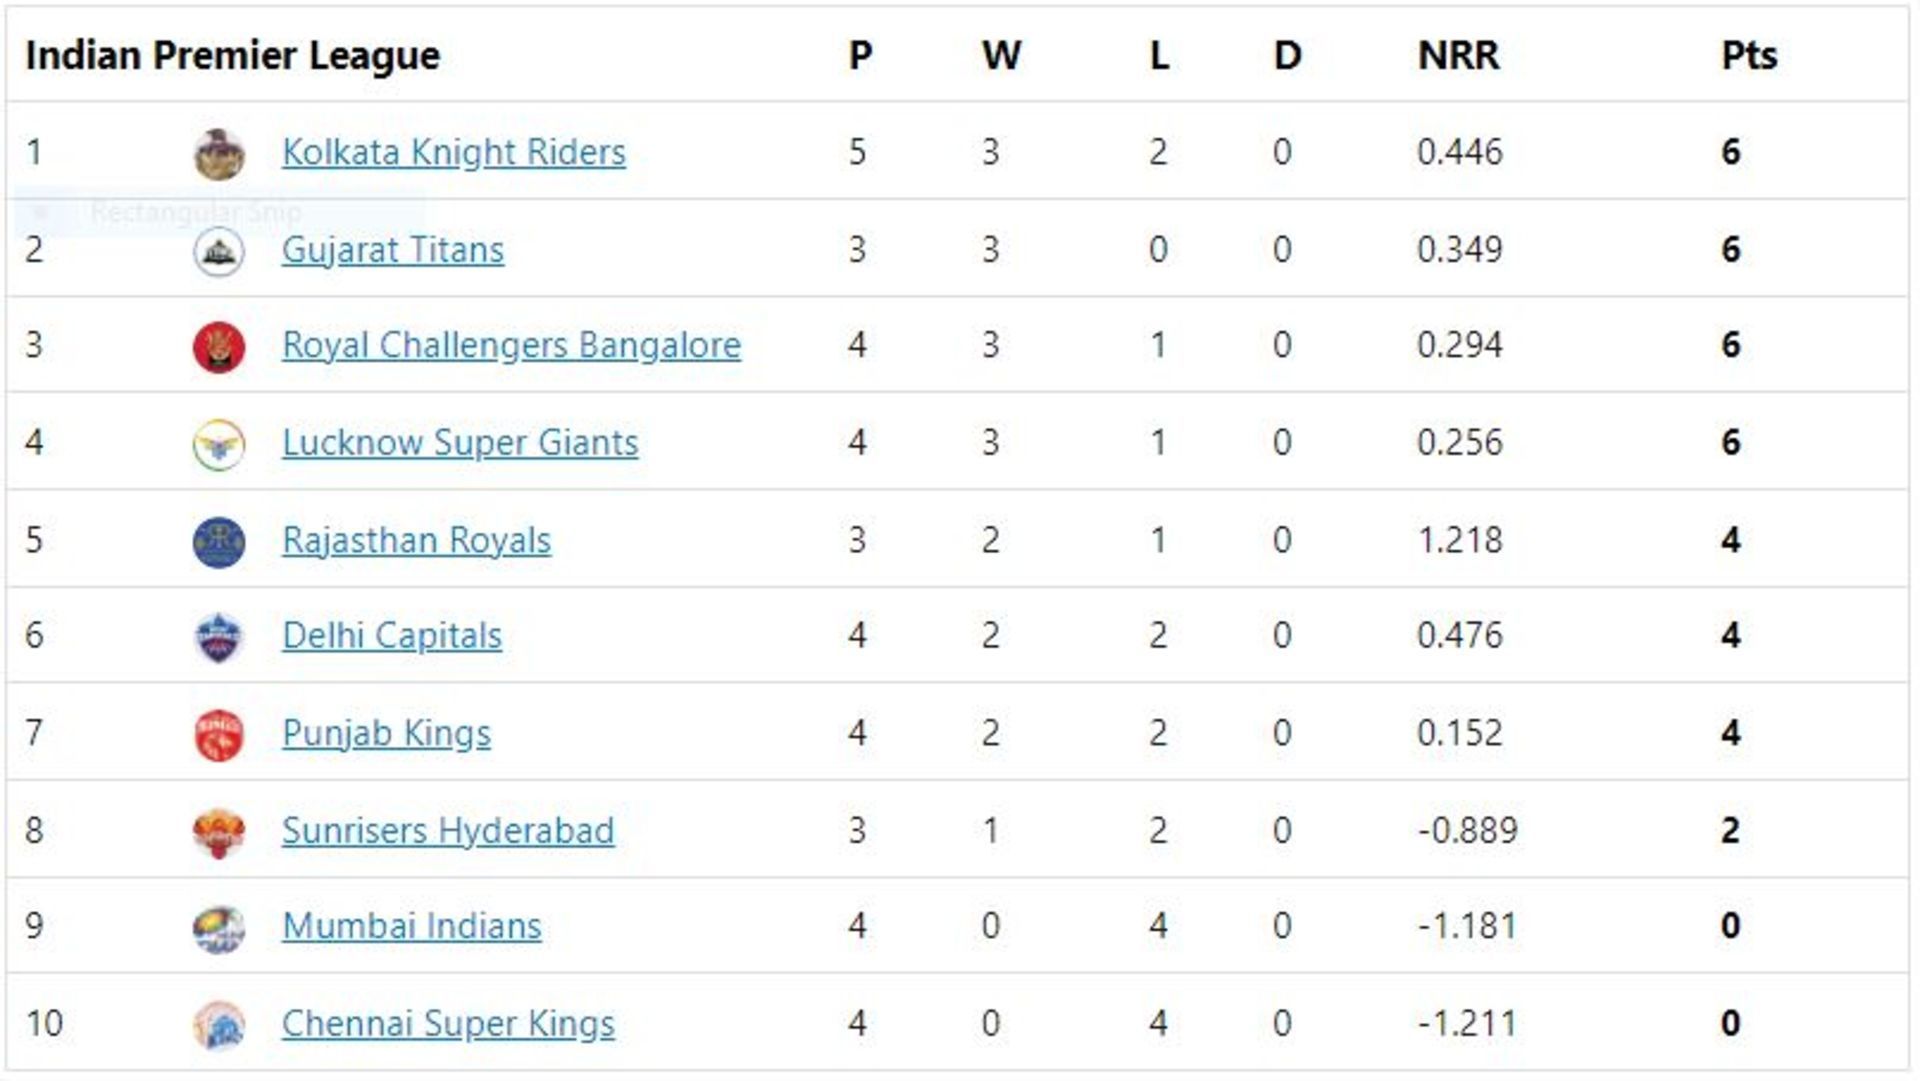 KKR remain at the top of the table for now despite the loss